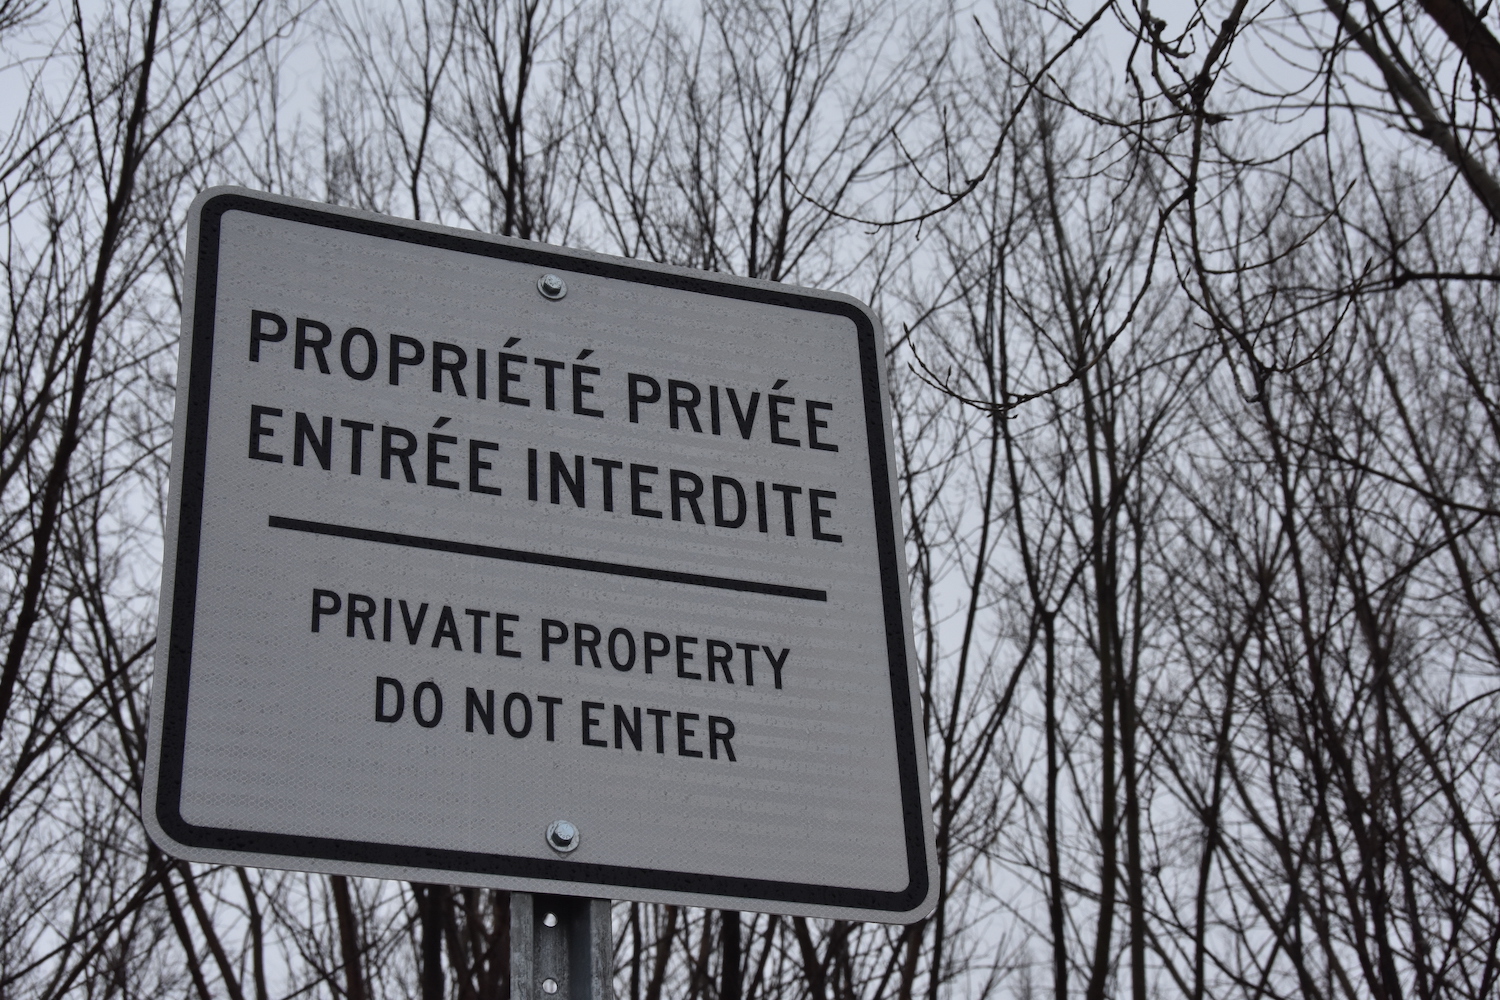 Private ownership of unregulated green spaces, especially in industrial areas like in Montreal’s east-end could complicate matters for government officials and residents wanting these spaces protected